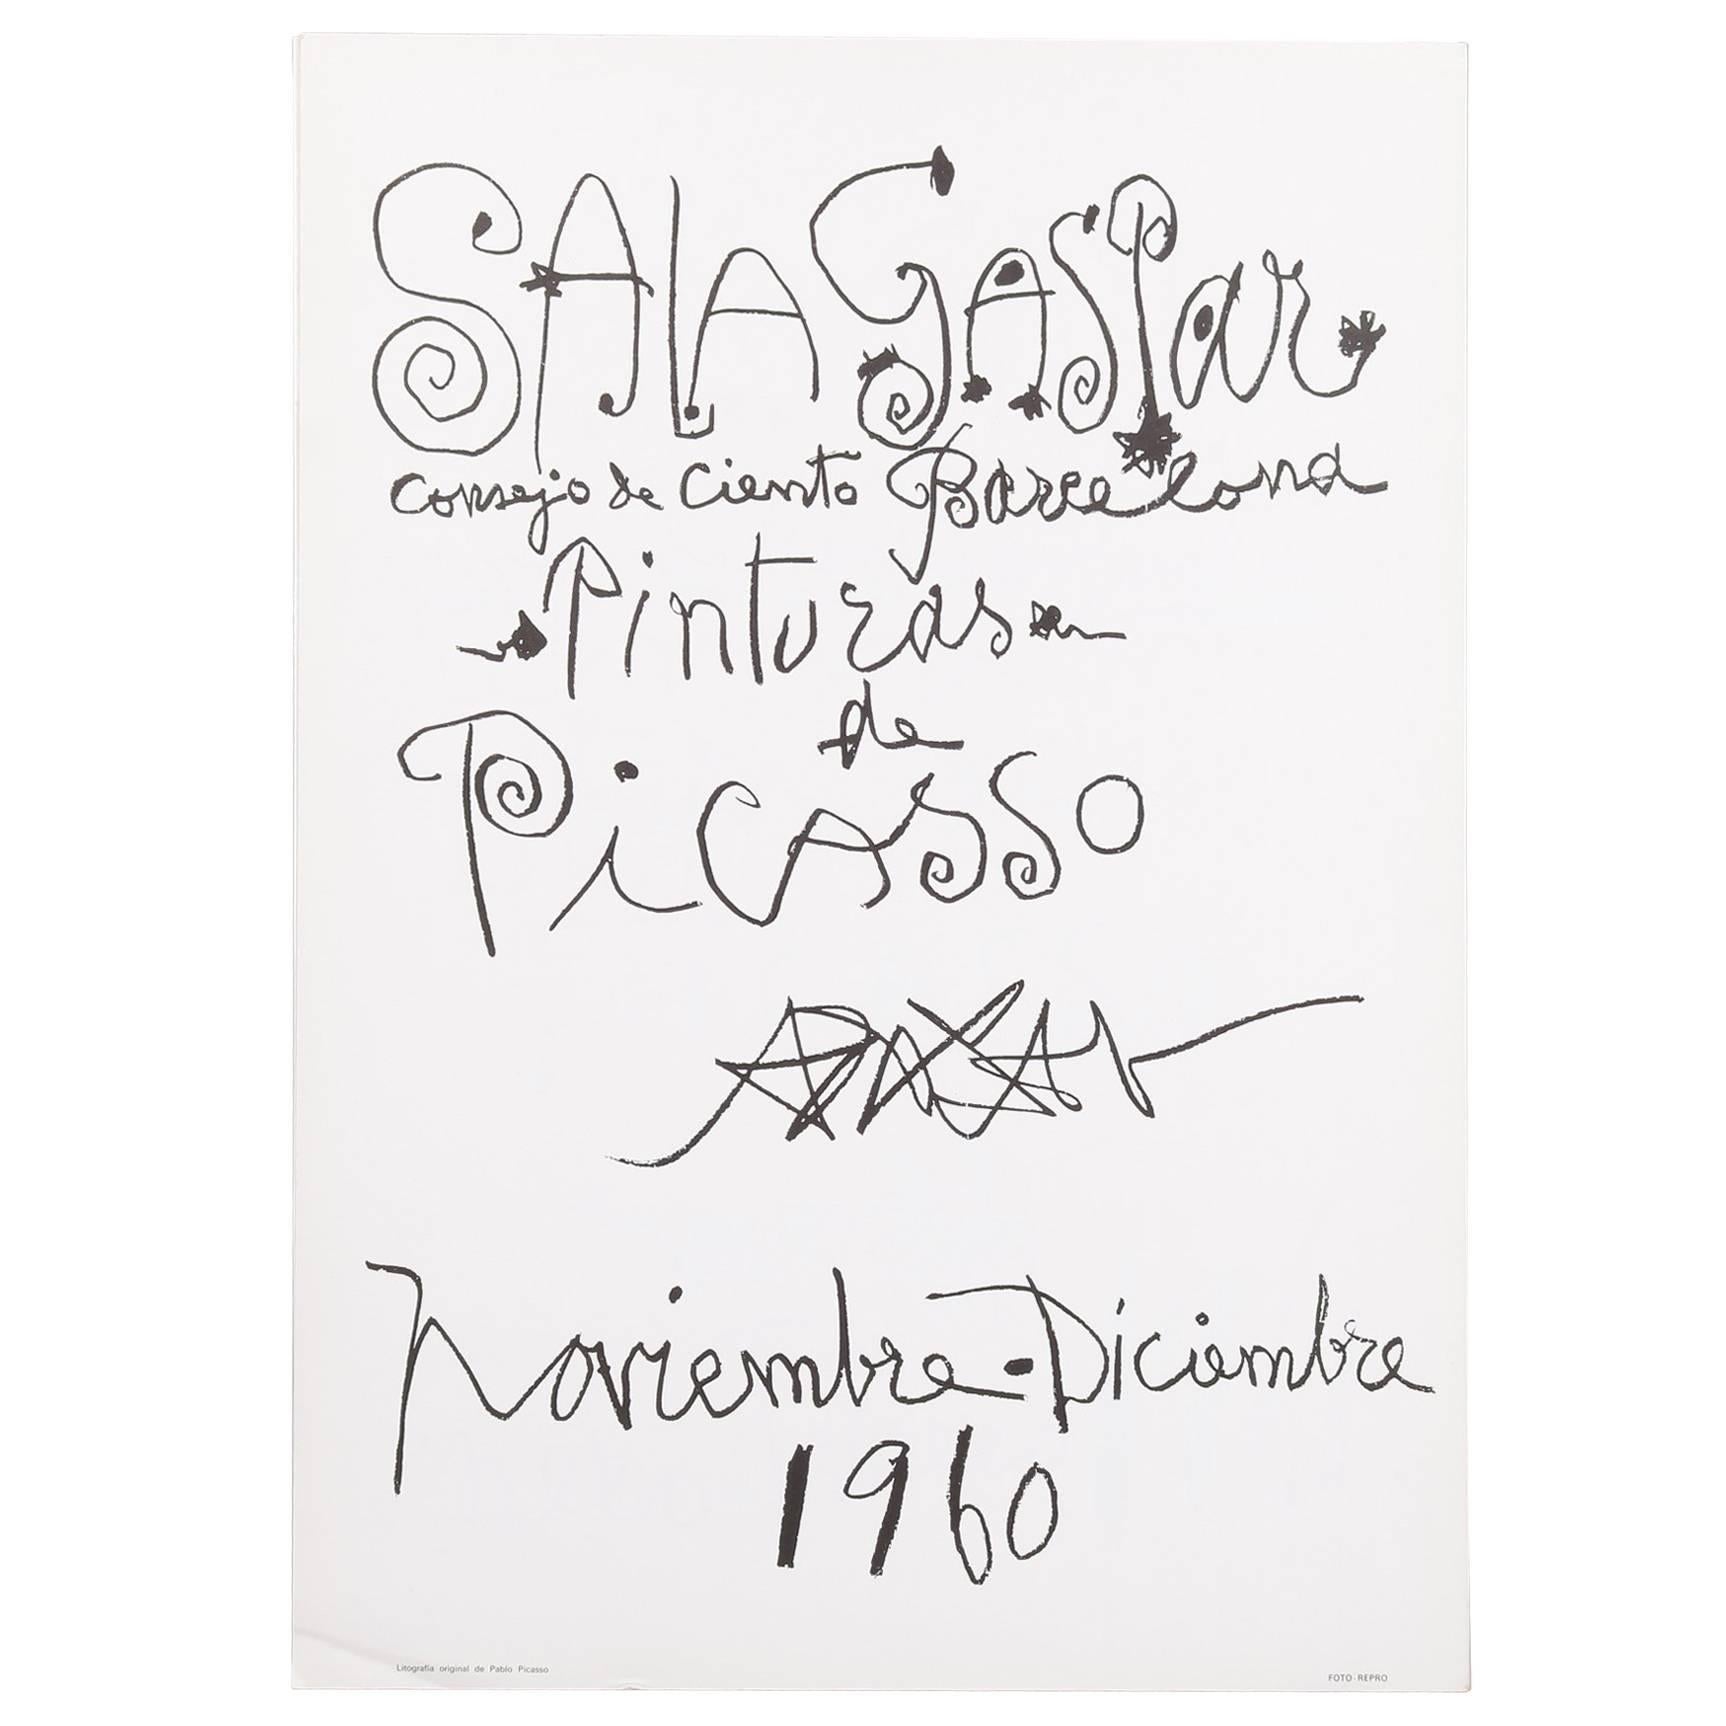 Original lithography poster by Pablo Picasso, 1960.
Catalogue raisonne: Czwiklitzer 40; Reusse 767

This limited edition poster was made for an exhibition ath the Sala Gaspar Gallery in Barcelona. It has the unique, playful style that is iconic for